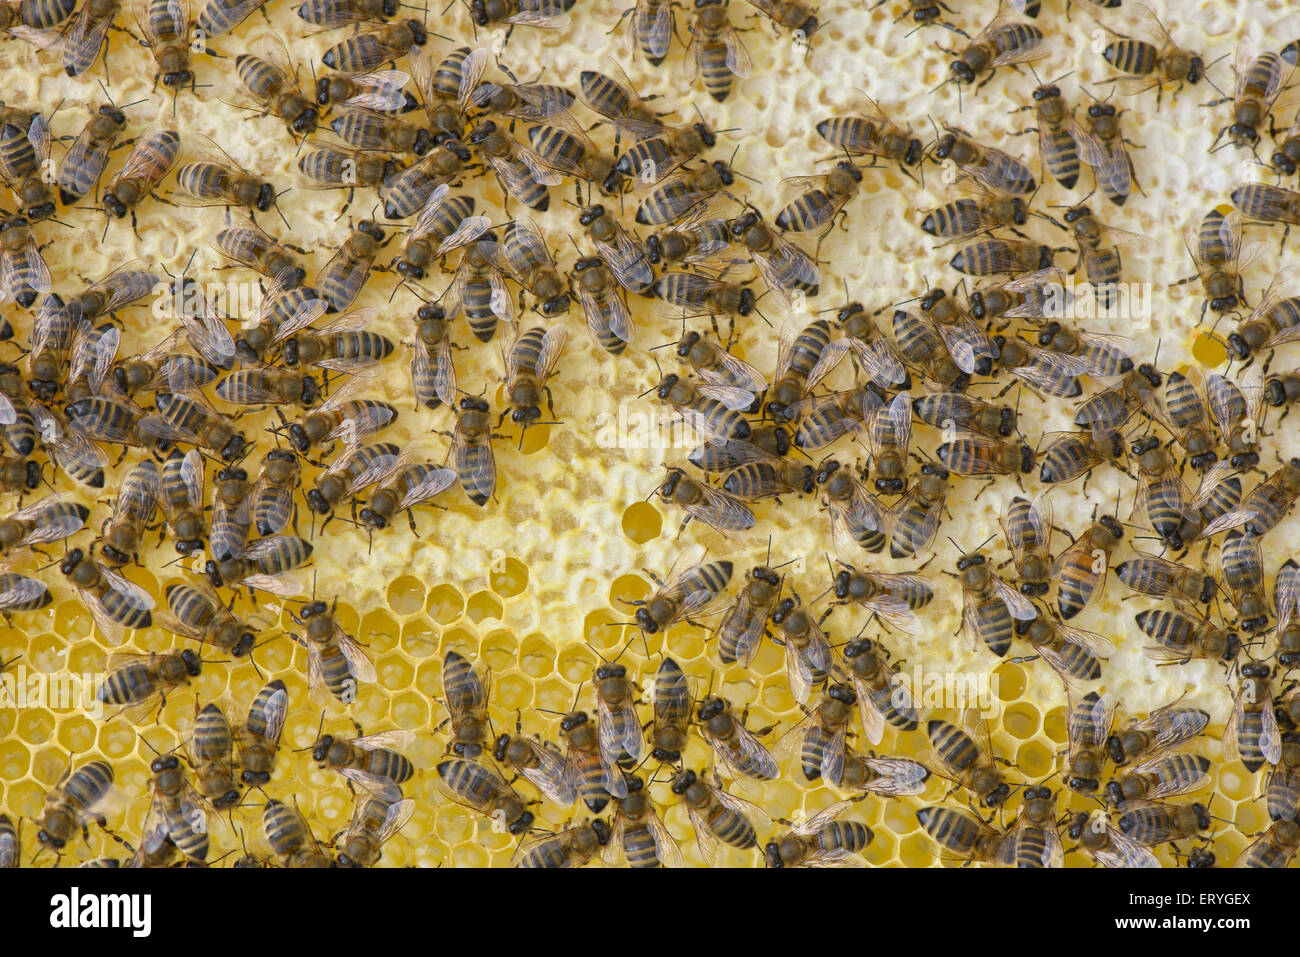 Bees making honeycomb in hive, Tyrol, Austria Stock Photo